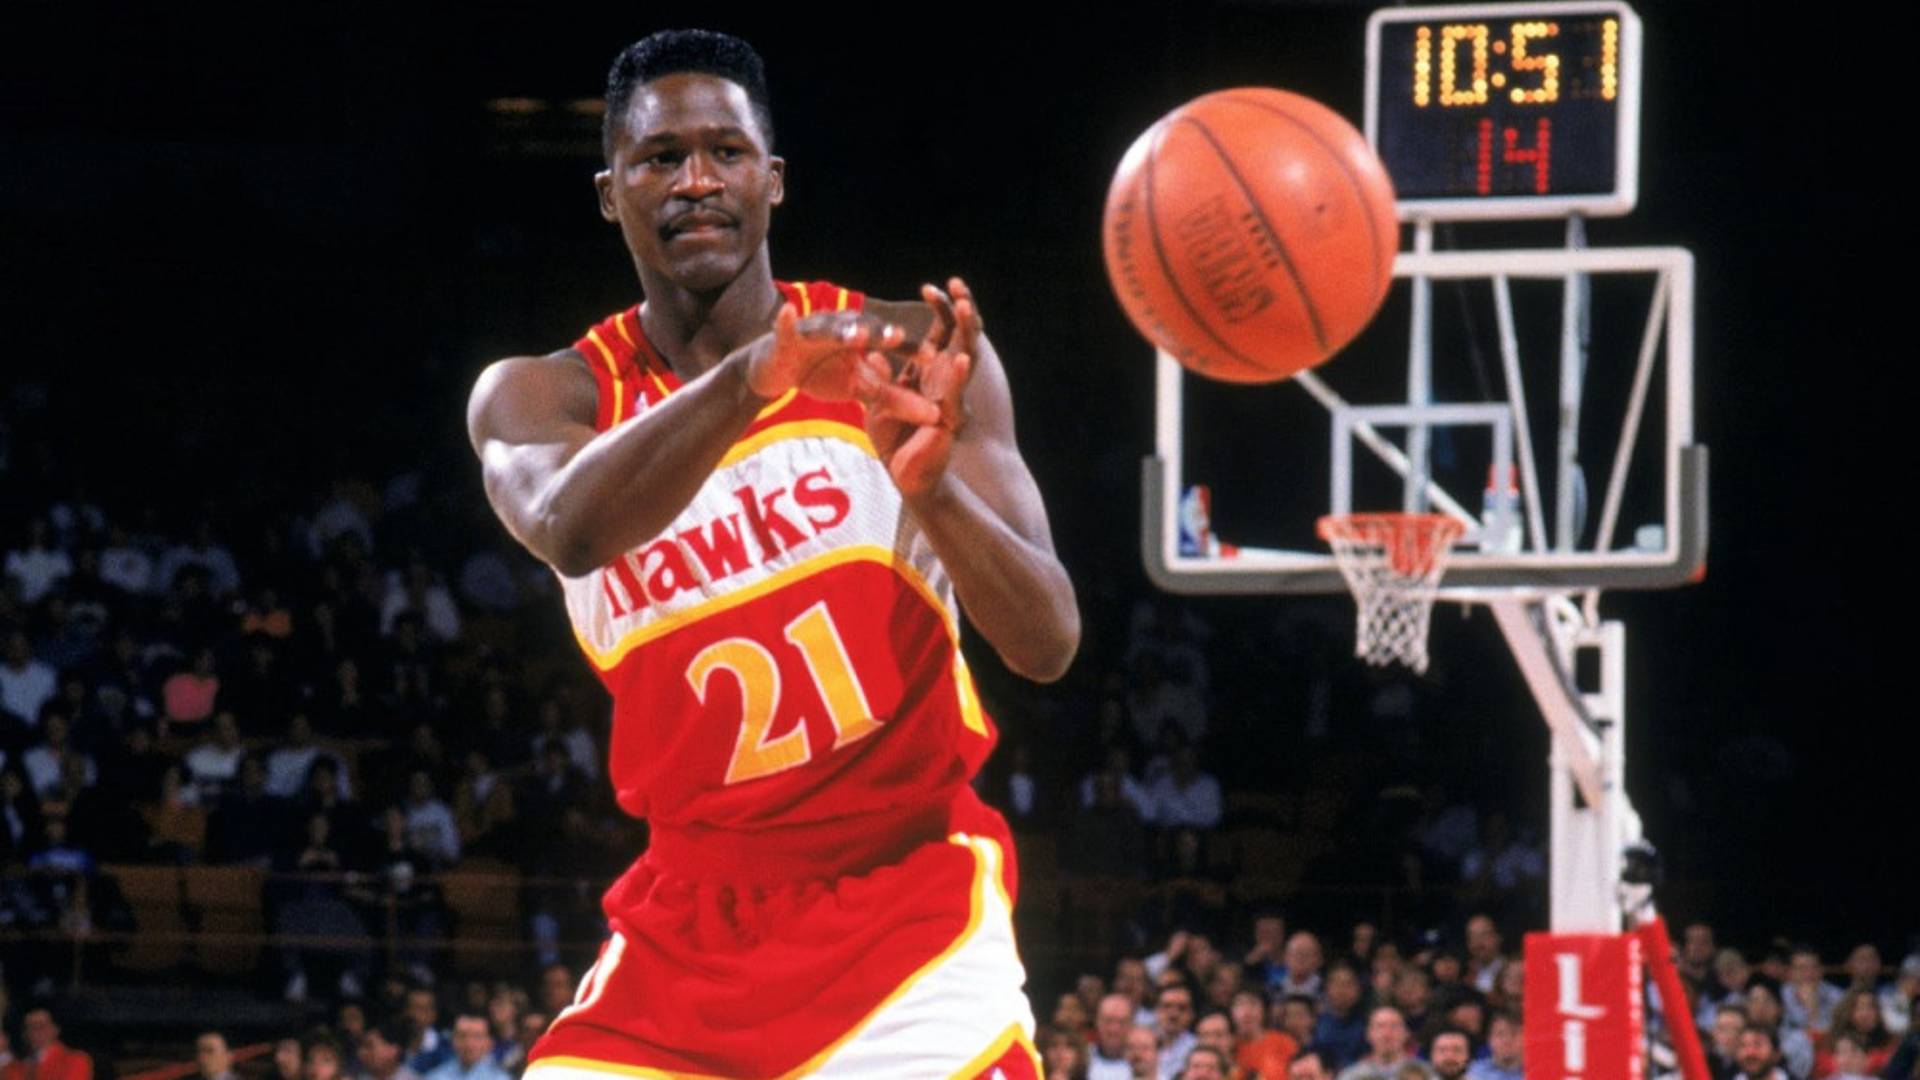 Dominique Wilkins in a file photo. (Image credits: twitter)